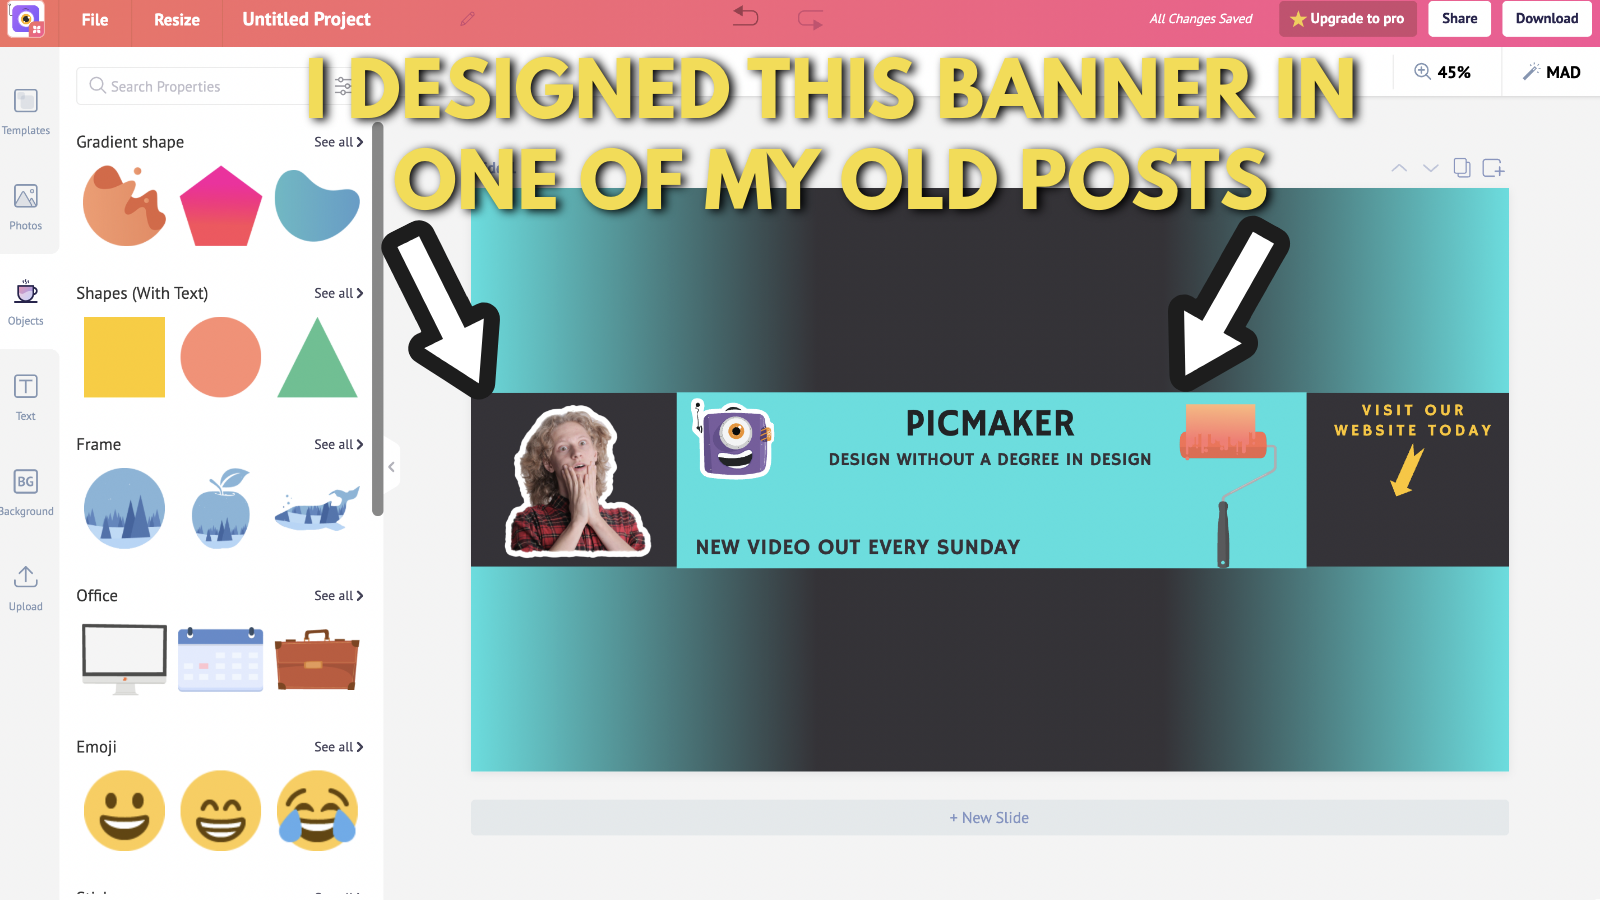 Screenshot of Picmaker's Youtube channel art creation process